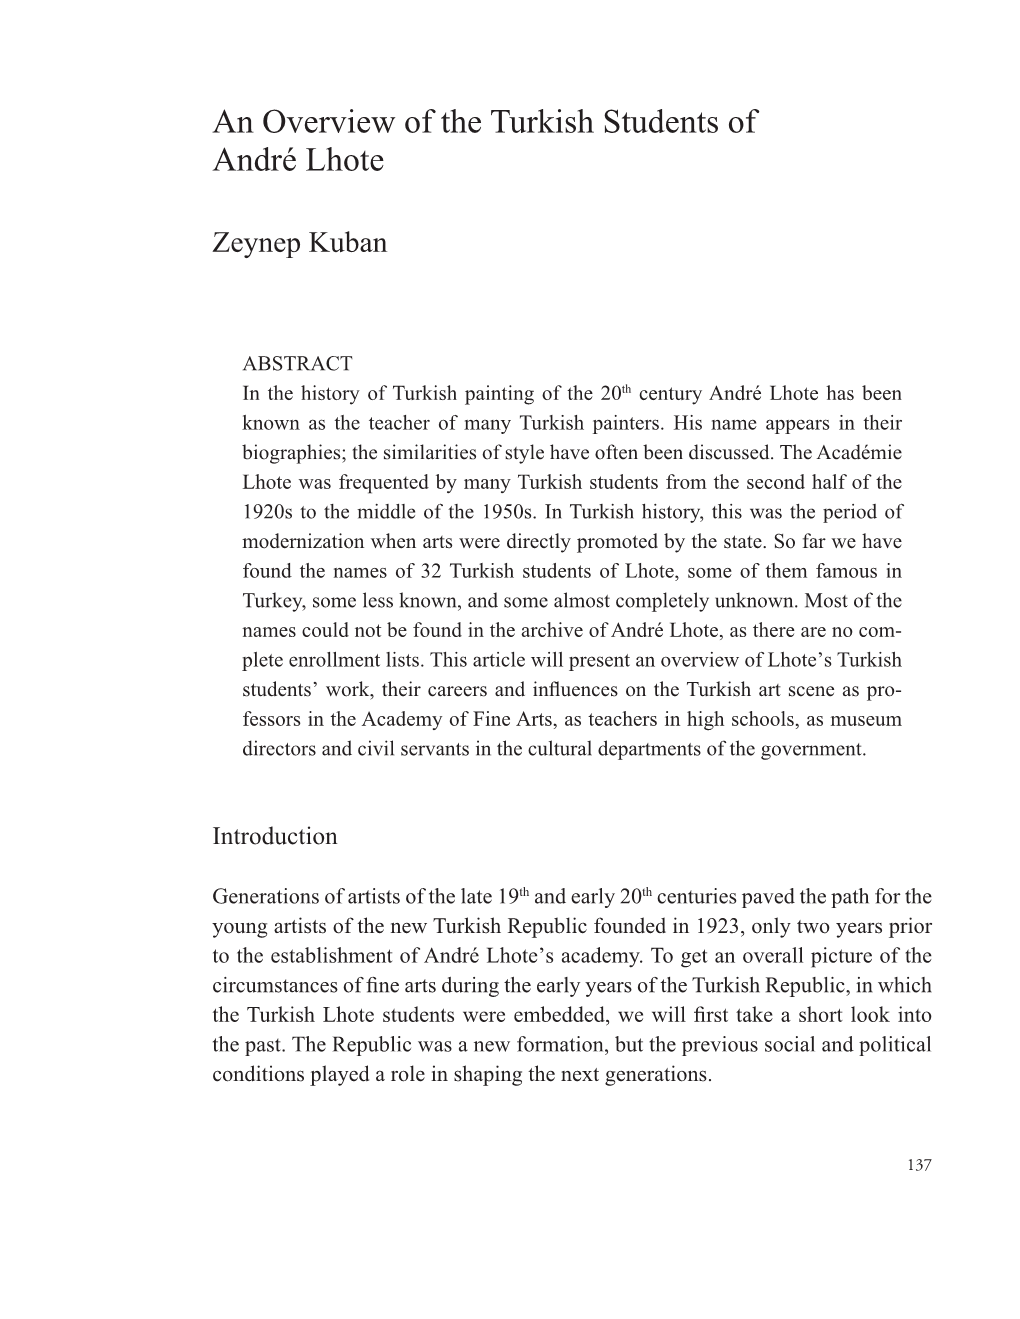 An Overview of the Turkish Students of André Lhote